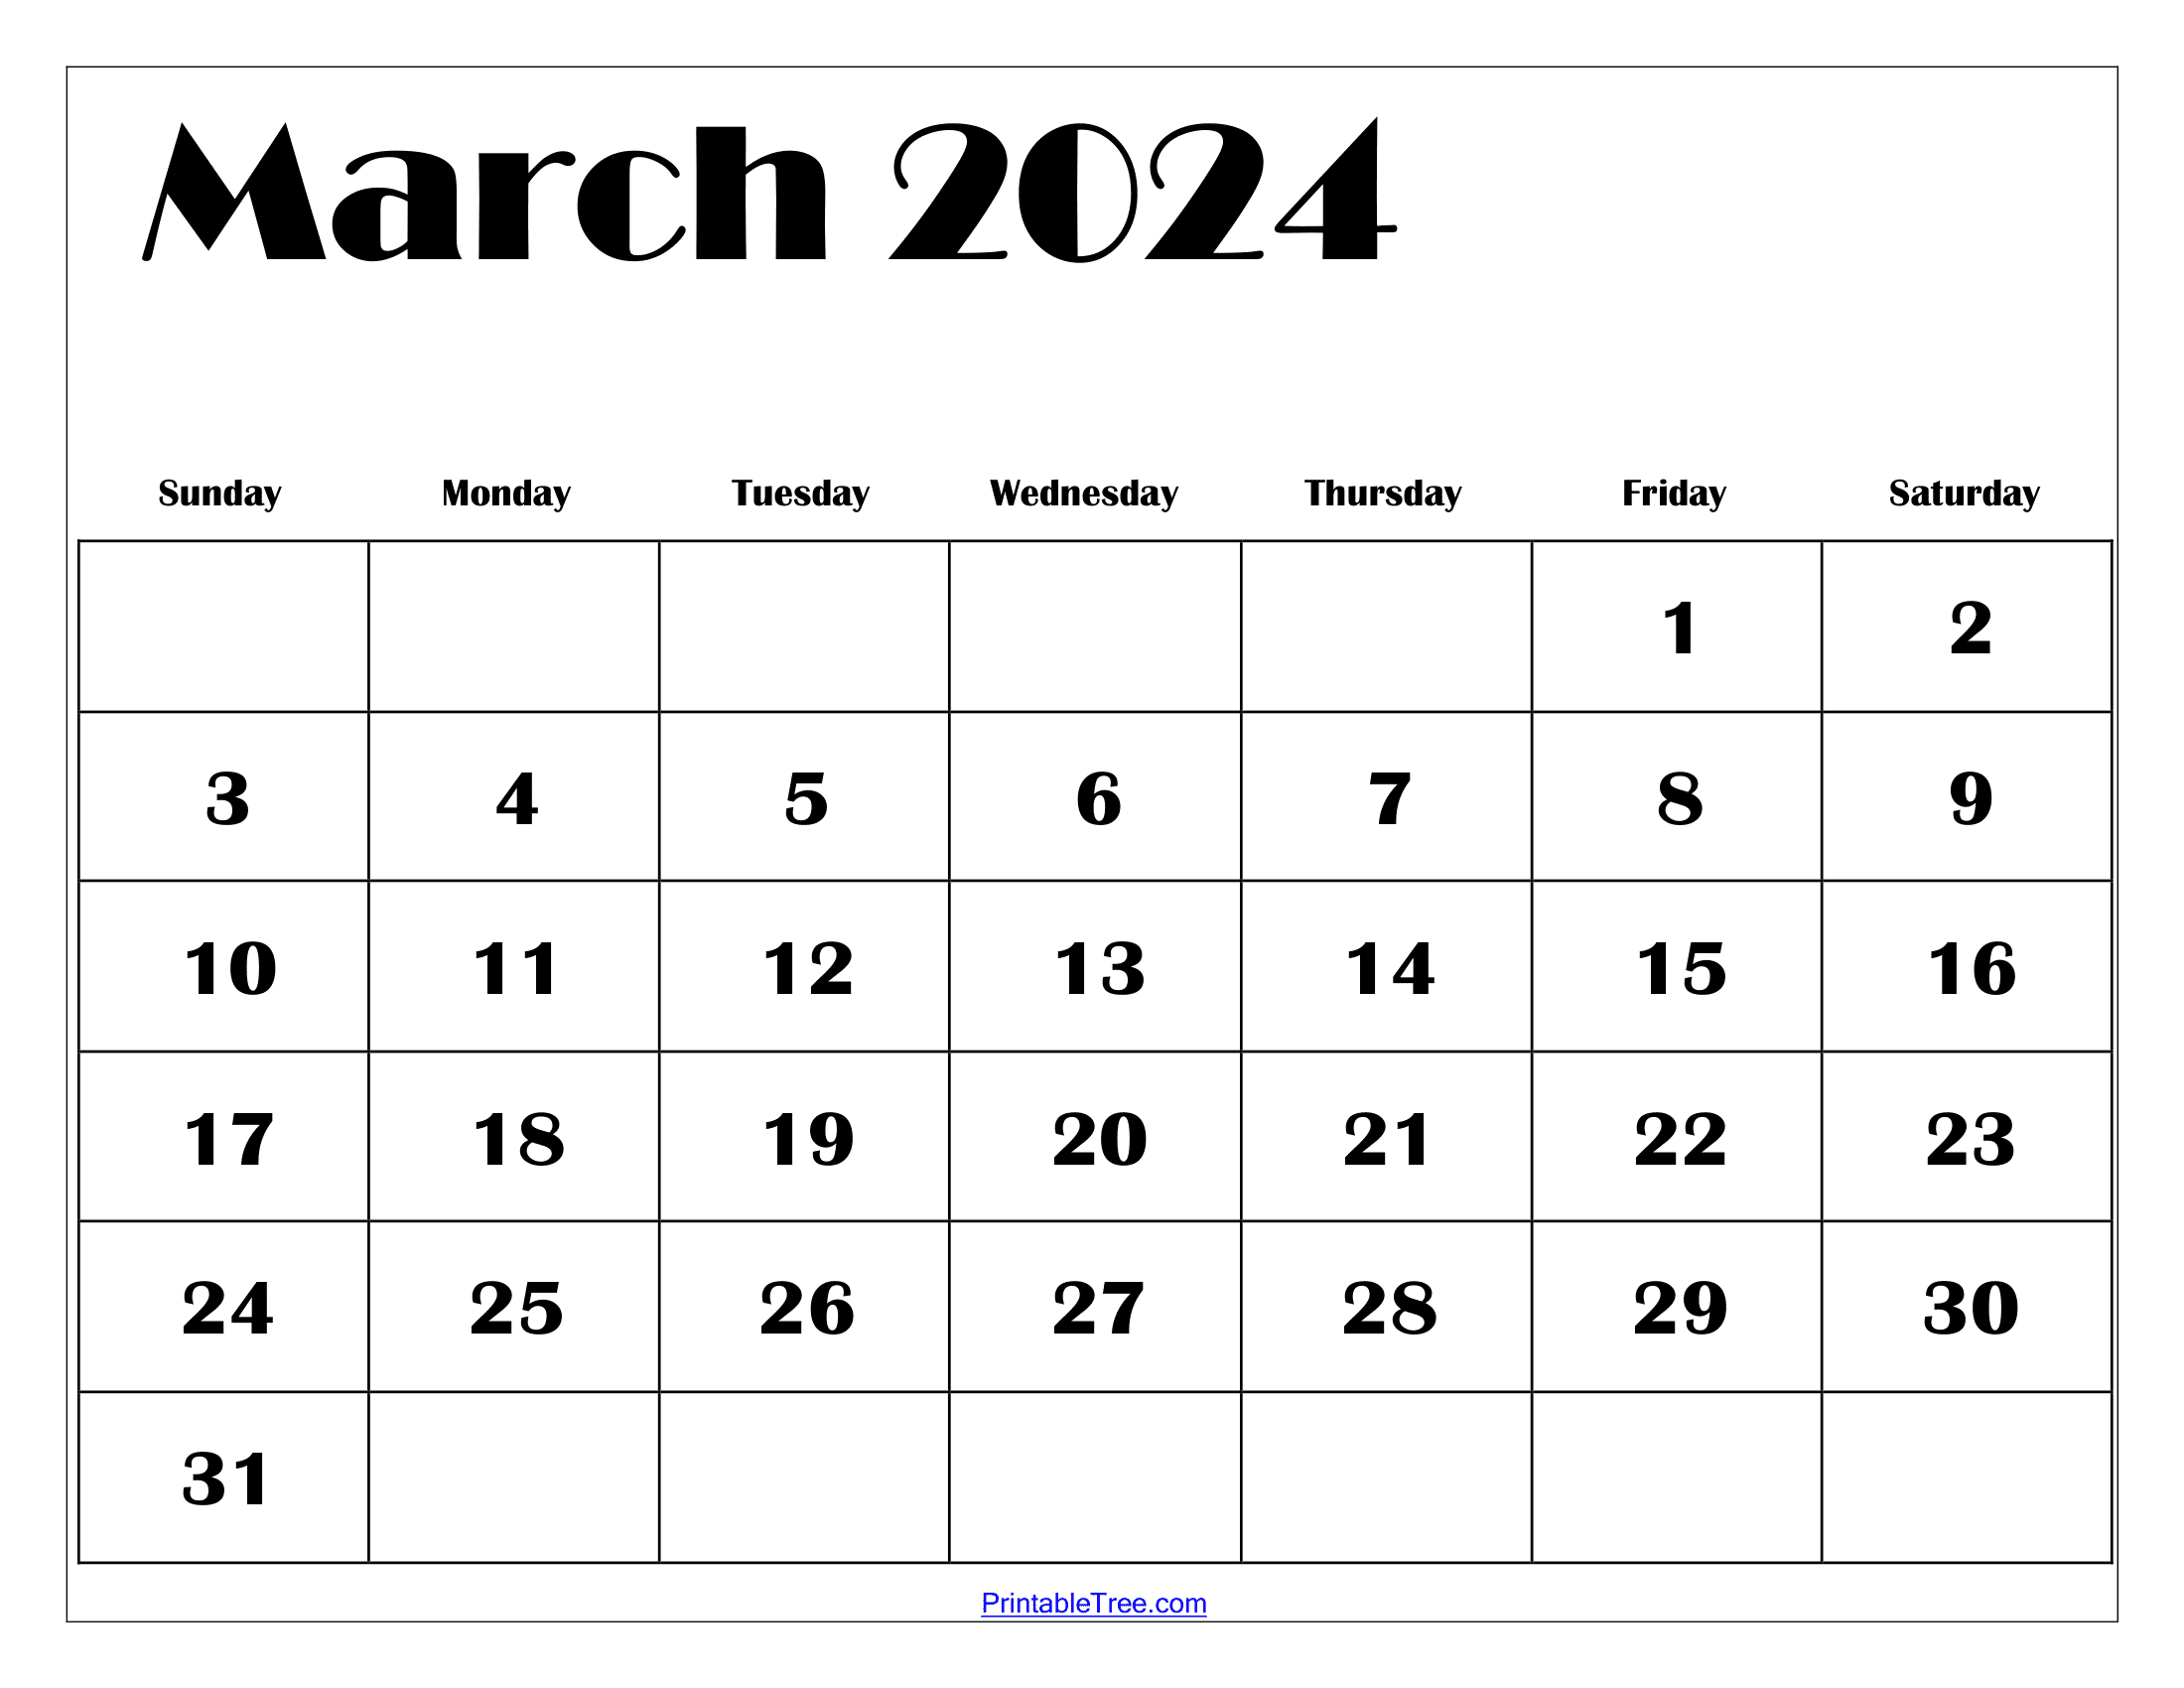 March 2024 Calendar Printable Pdf With Holidays Template Free for March Calendar Free Printable 2024